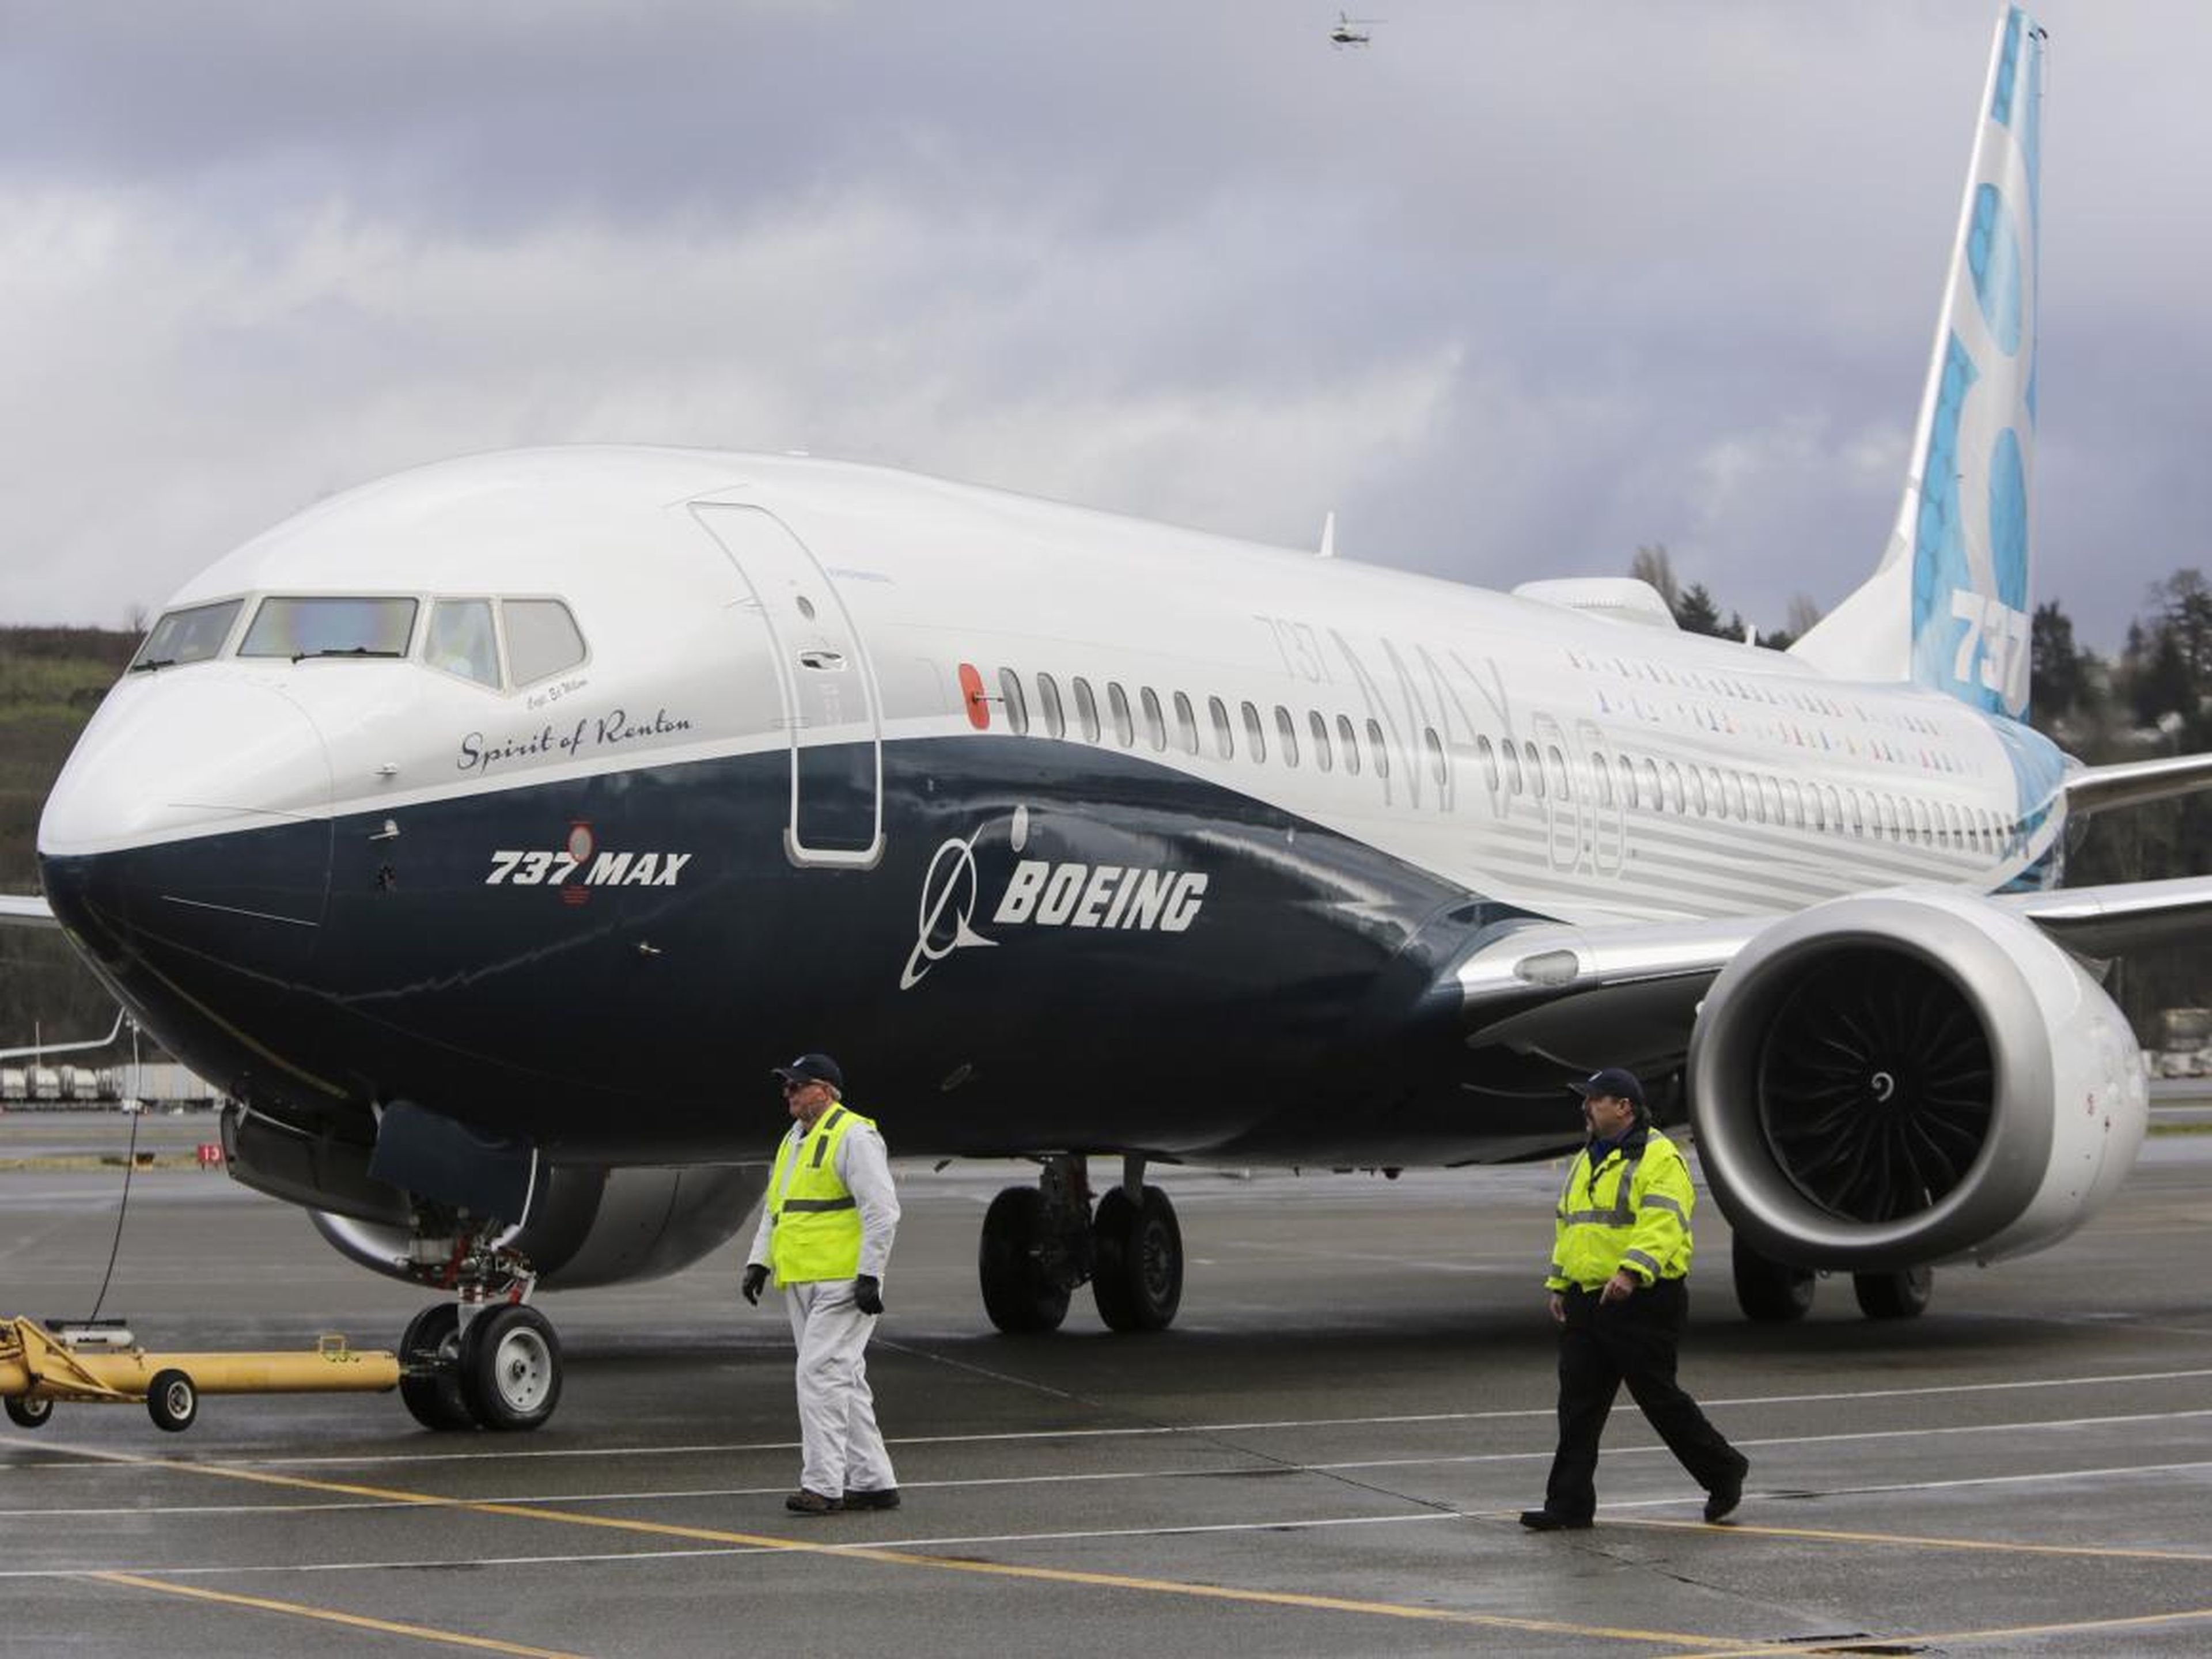 Boeing just unveiled how it's going to fix the 737 Max that was grounded after 2 fatal crashes in recent months